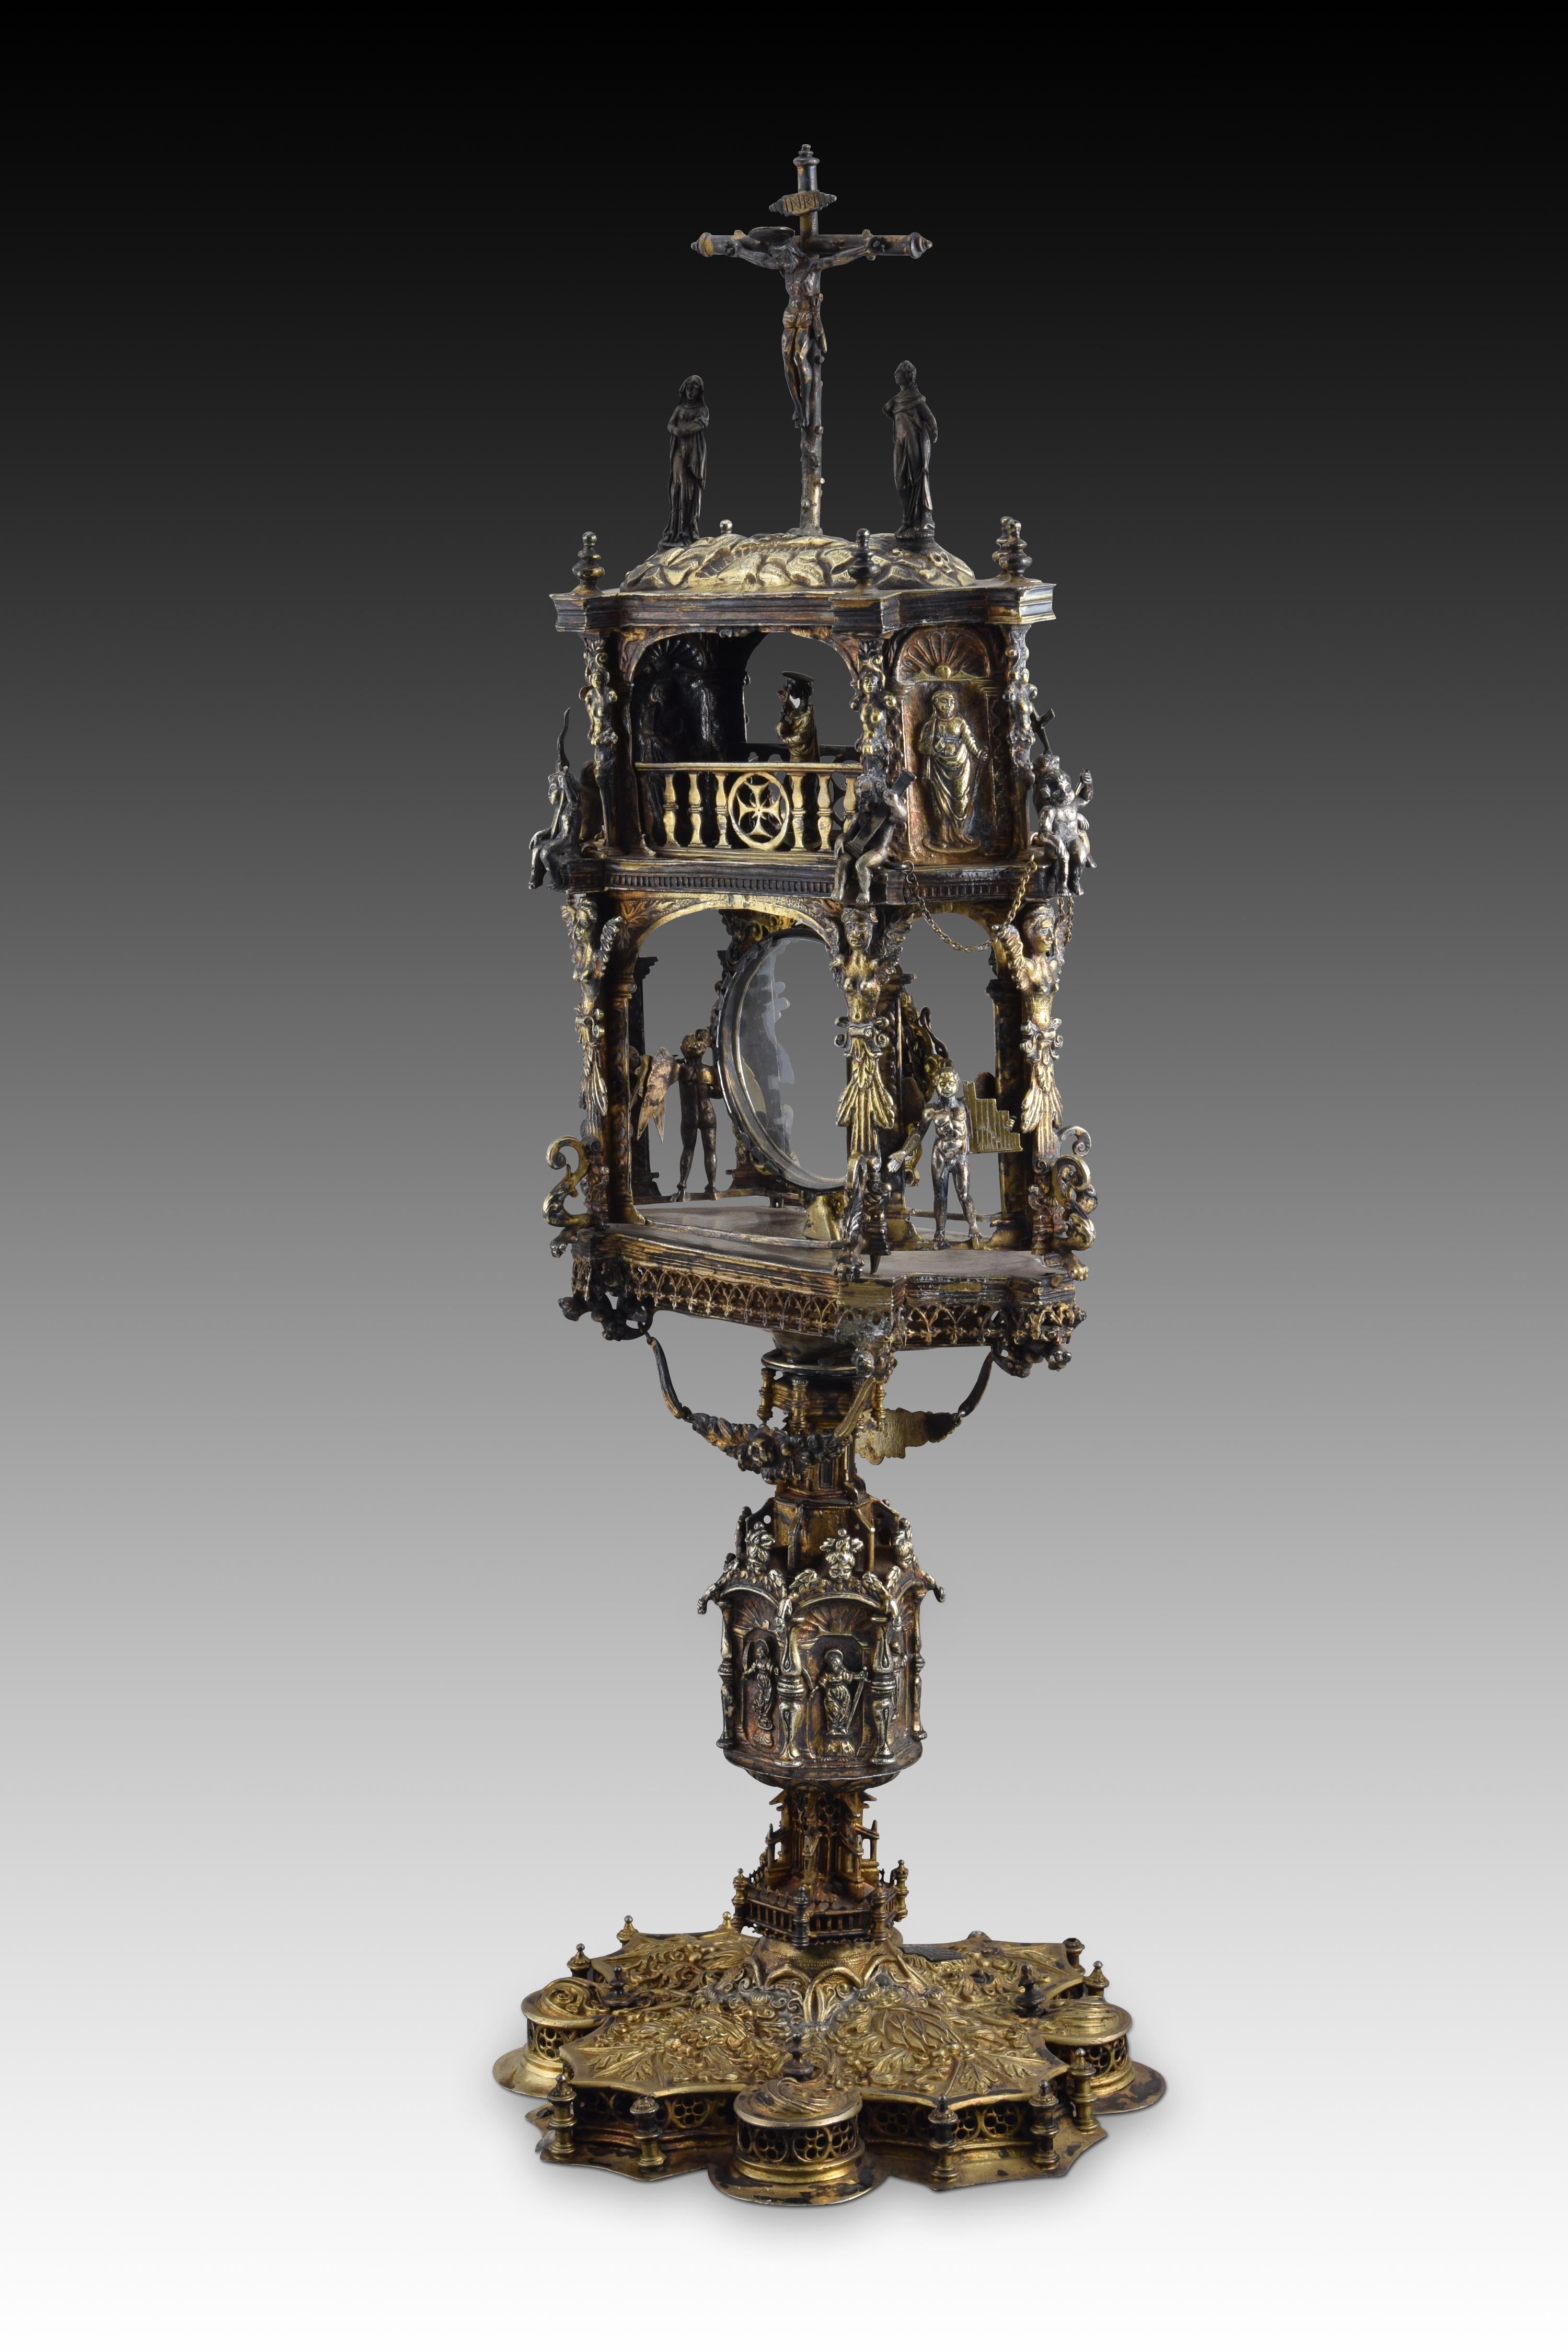 Renaissance Monstrance (temple type). Silver. Spain, 16th century with restorations. For Sale